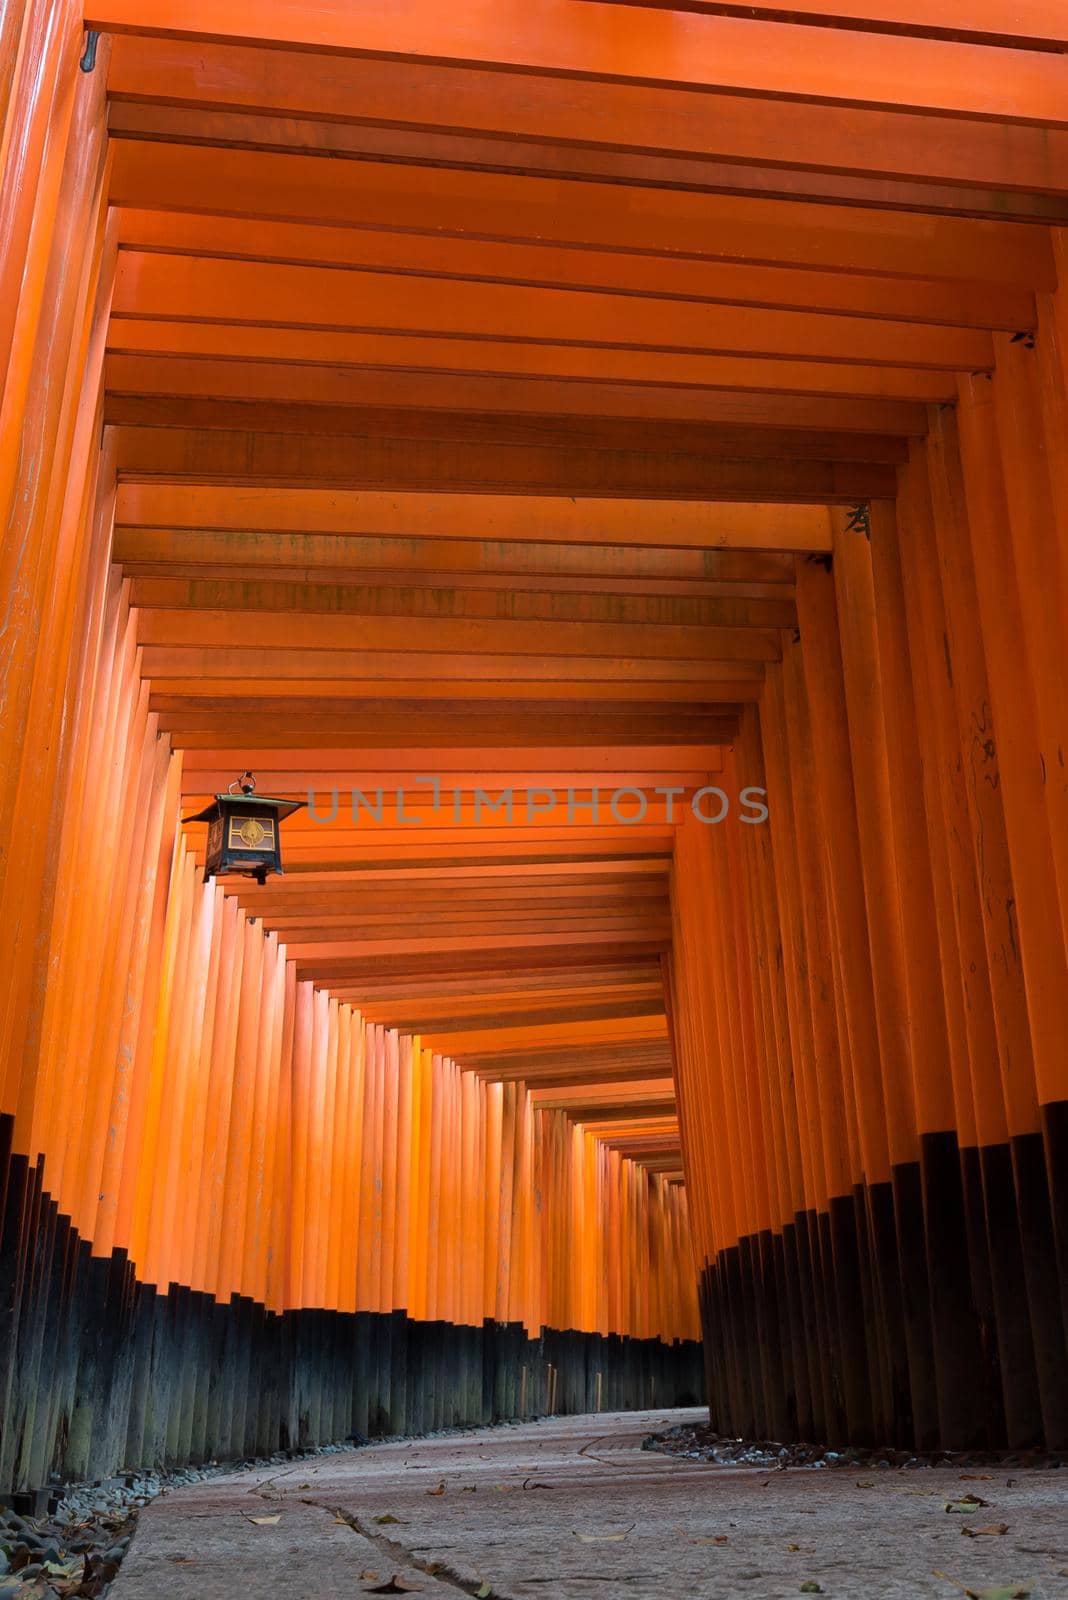 The red torii gates walkway path at fushimi inari taisha shrine the one of attraction  landmarks for tourist in Kyoto, Japan by Nuamfolio